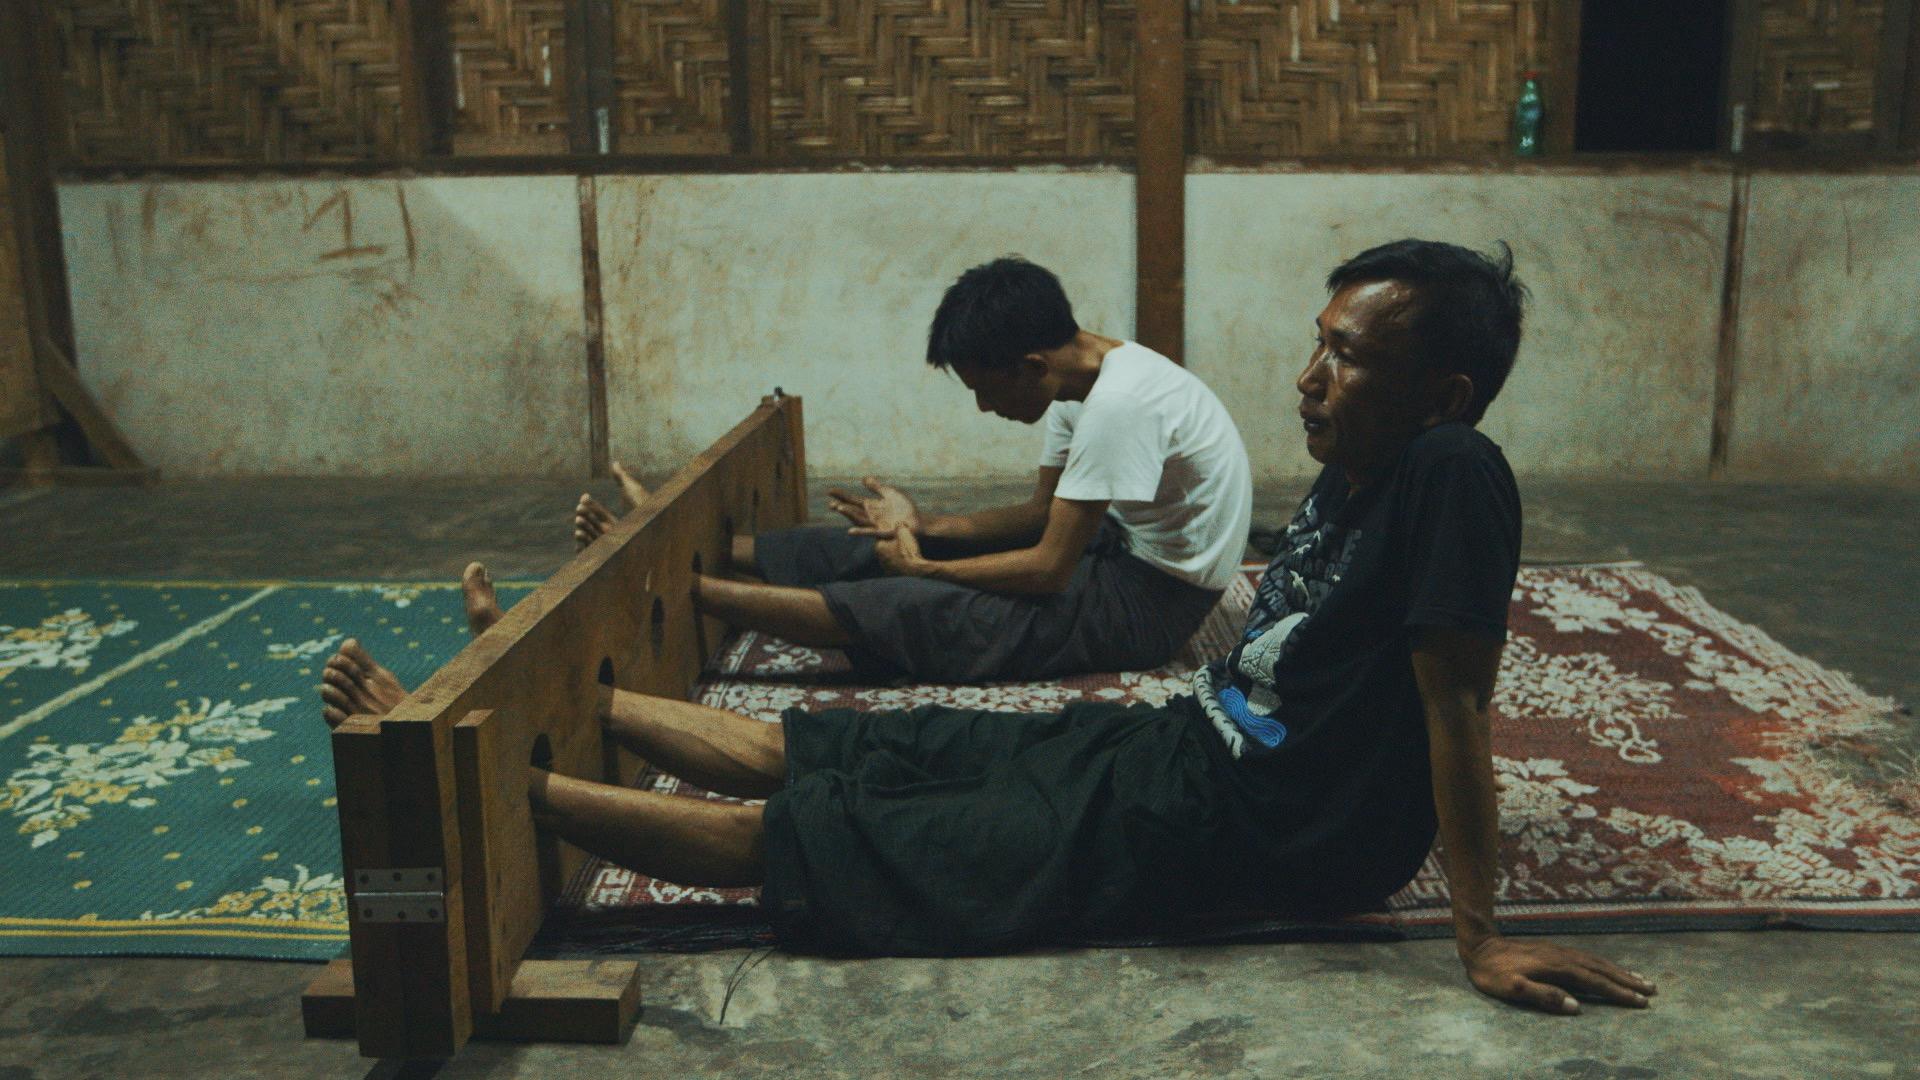 Accused drug users, captured in night raids by anti-drug vigilantes, are detained in wooden stocks inside a church in Myitkyina. Those detained by the anti-drug Patjasan are often flogged with bamboo rods and forced to denounce drugs.